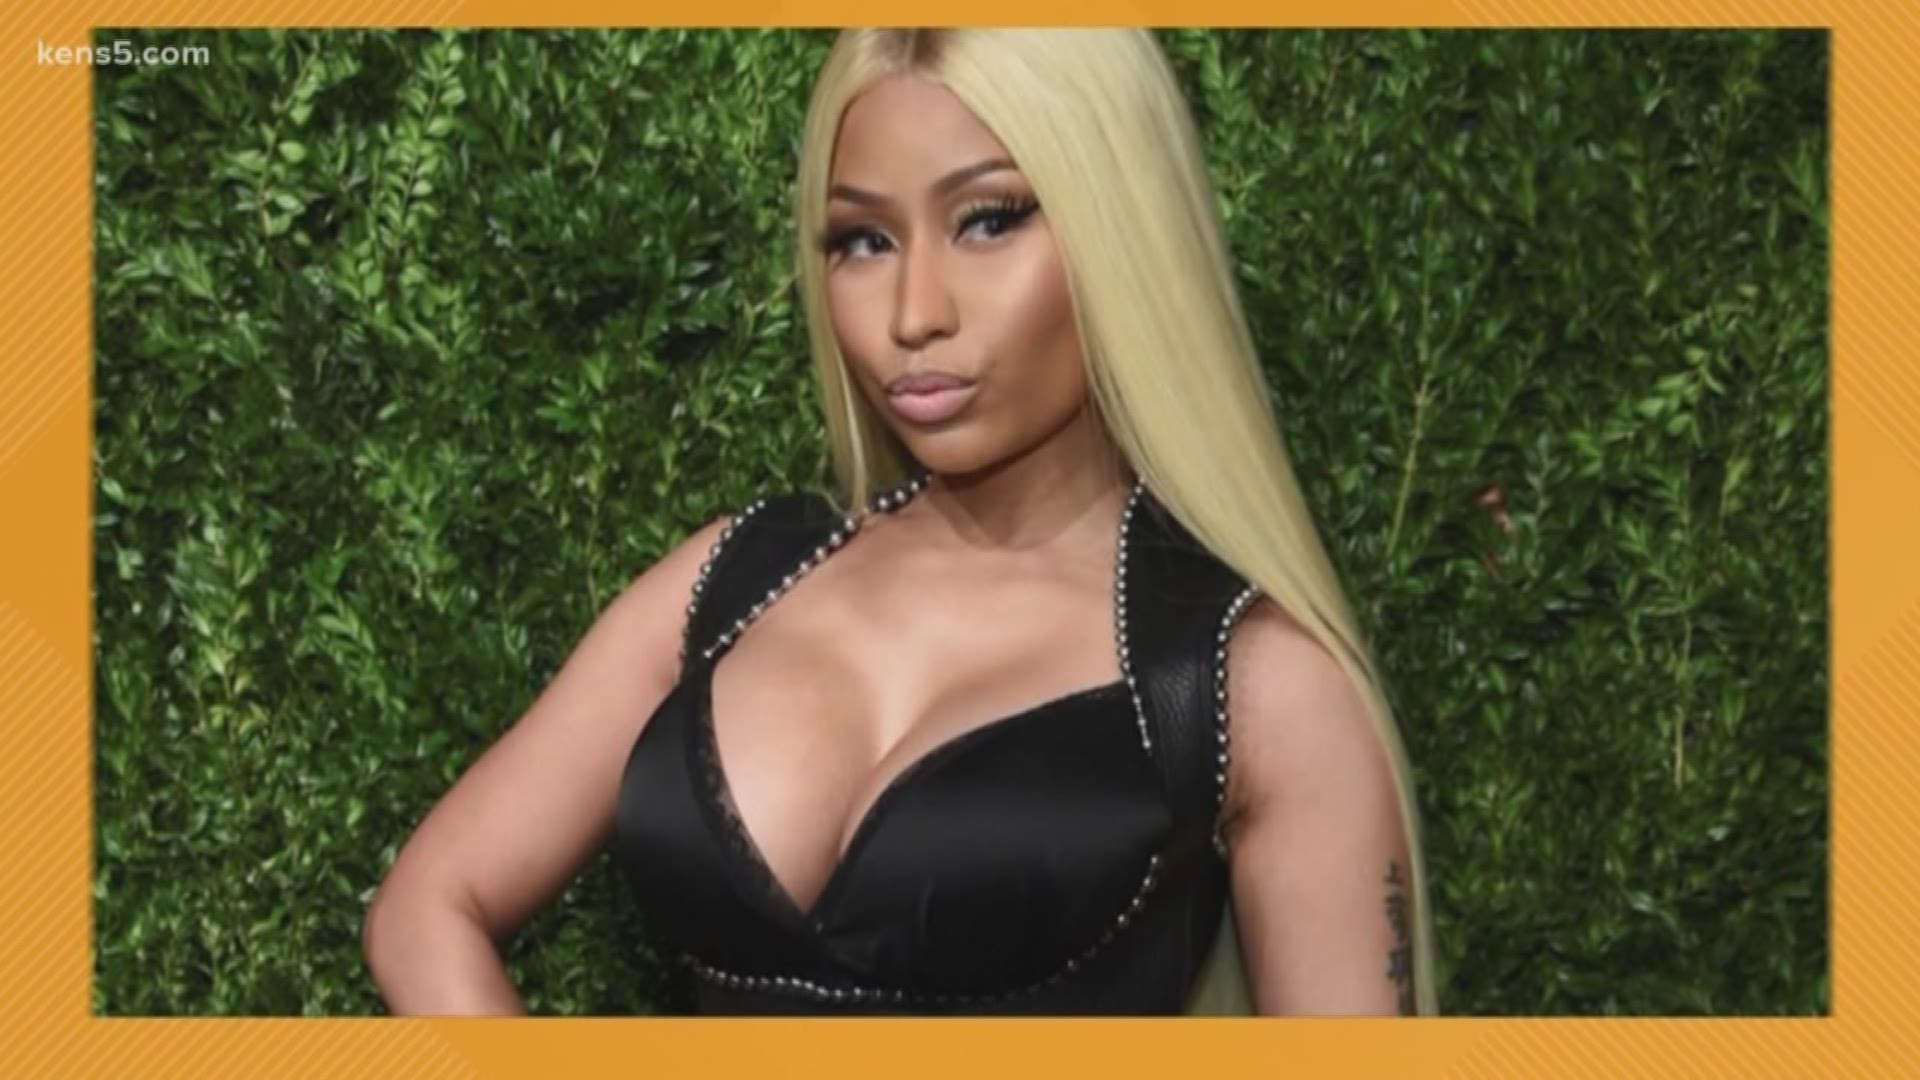 Nicki Minaj is taking some time away from her rap career to focus on starting a family. Digital Journalist Megan Ball joins us with more.